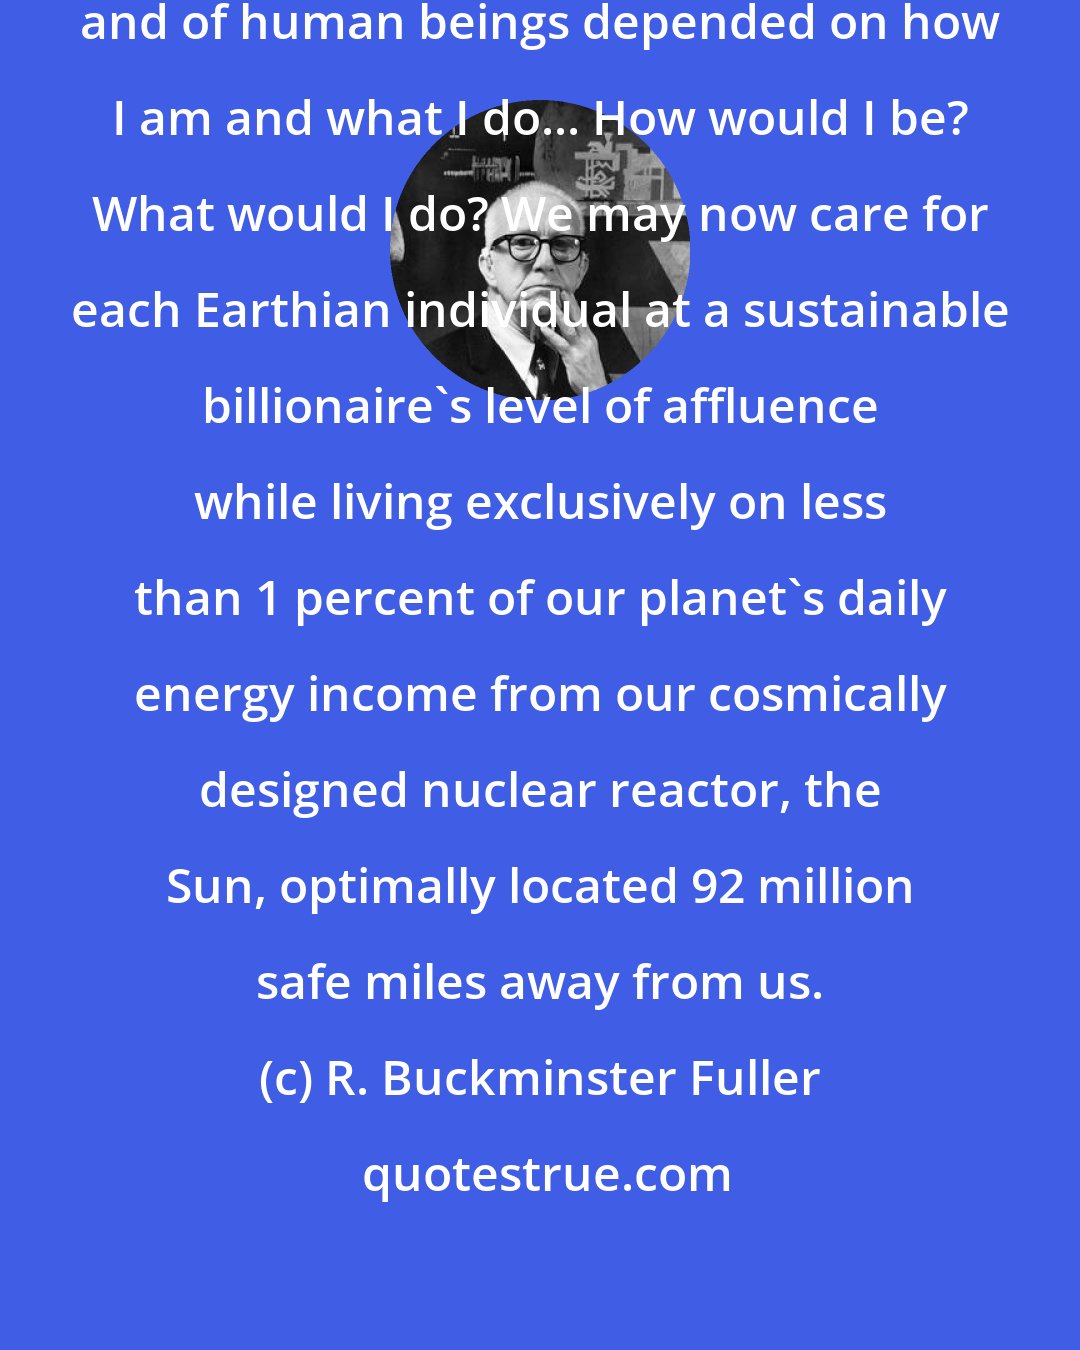 R. Buckminster Fuller: If success or failure of this planet and of human beings depended on how I am and what I do... How would I be? What would I do? We may now care for each Earthian individual at a sustainable billionaire's level of affluence while living exclusively on less than 1 percent of our planet's daily energy income from our cosmically designed nuclear reactor, the Sun, optimally located 92 million safe miles away from us.